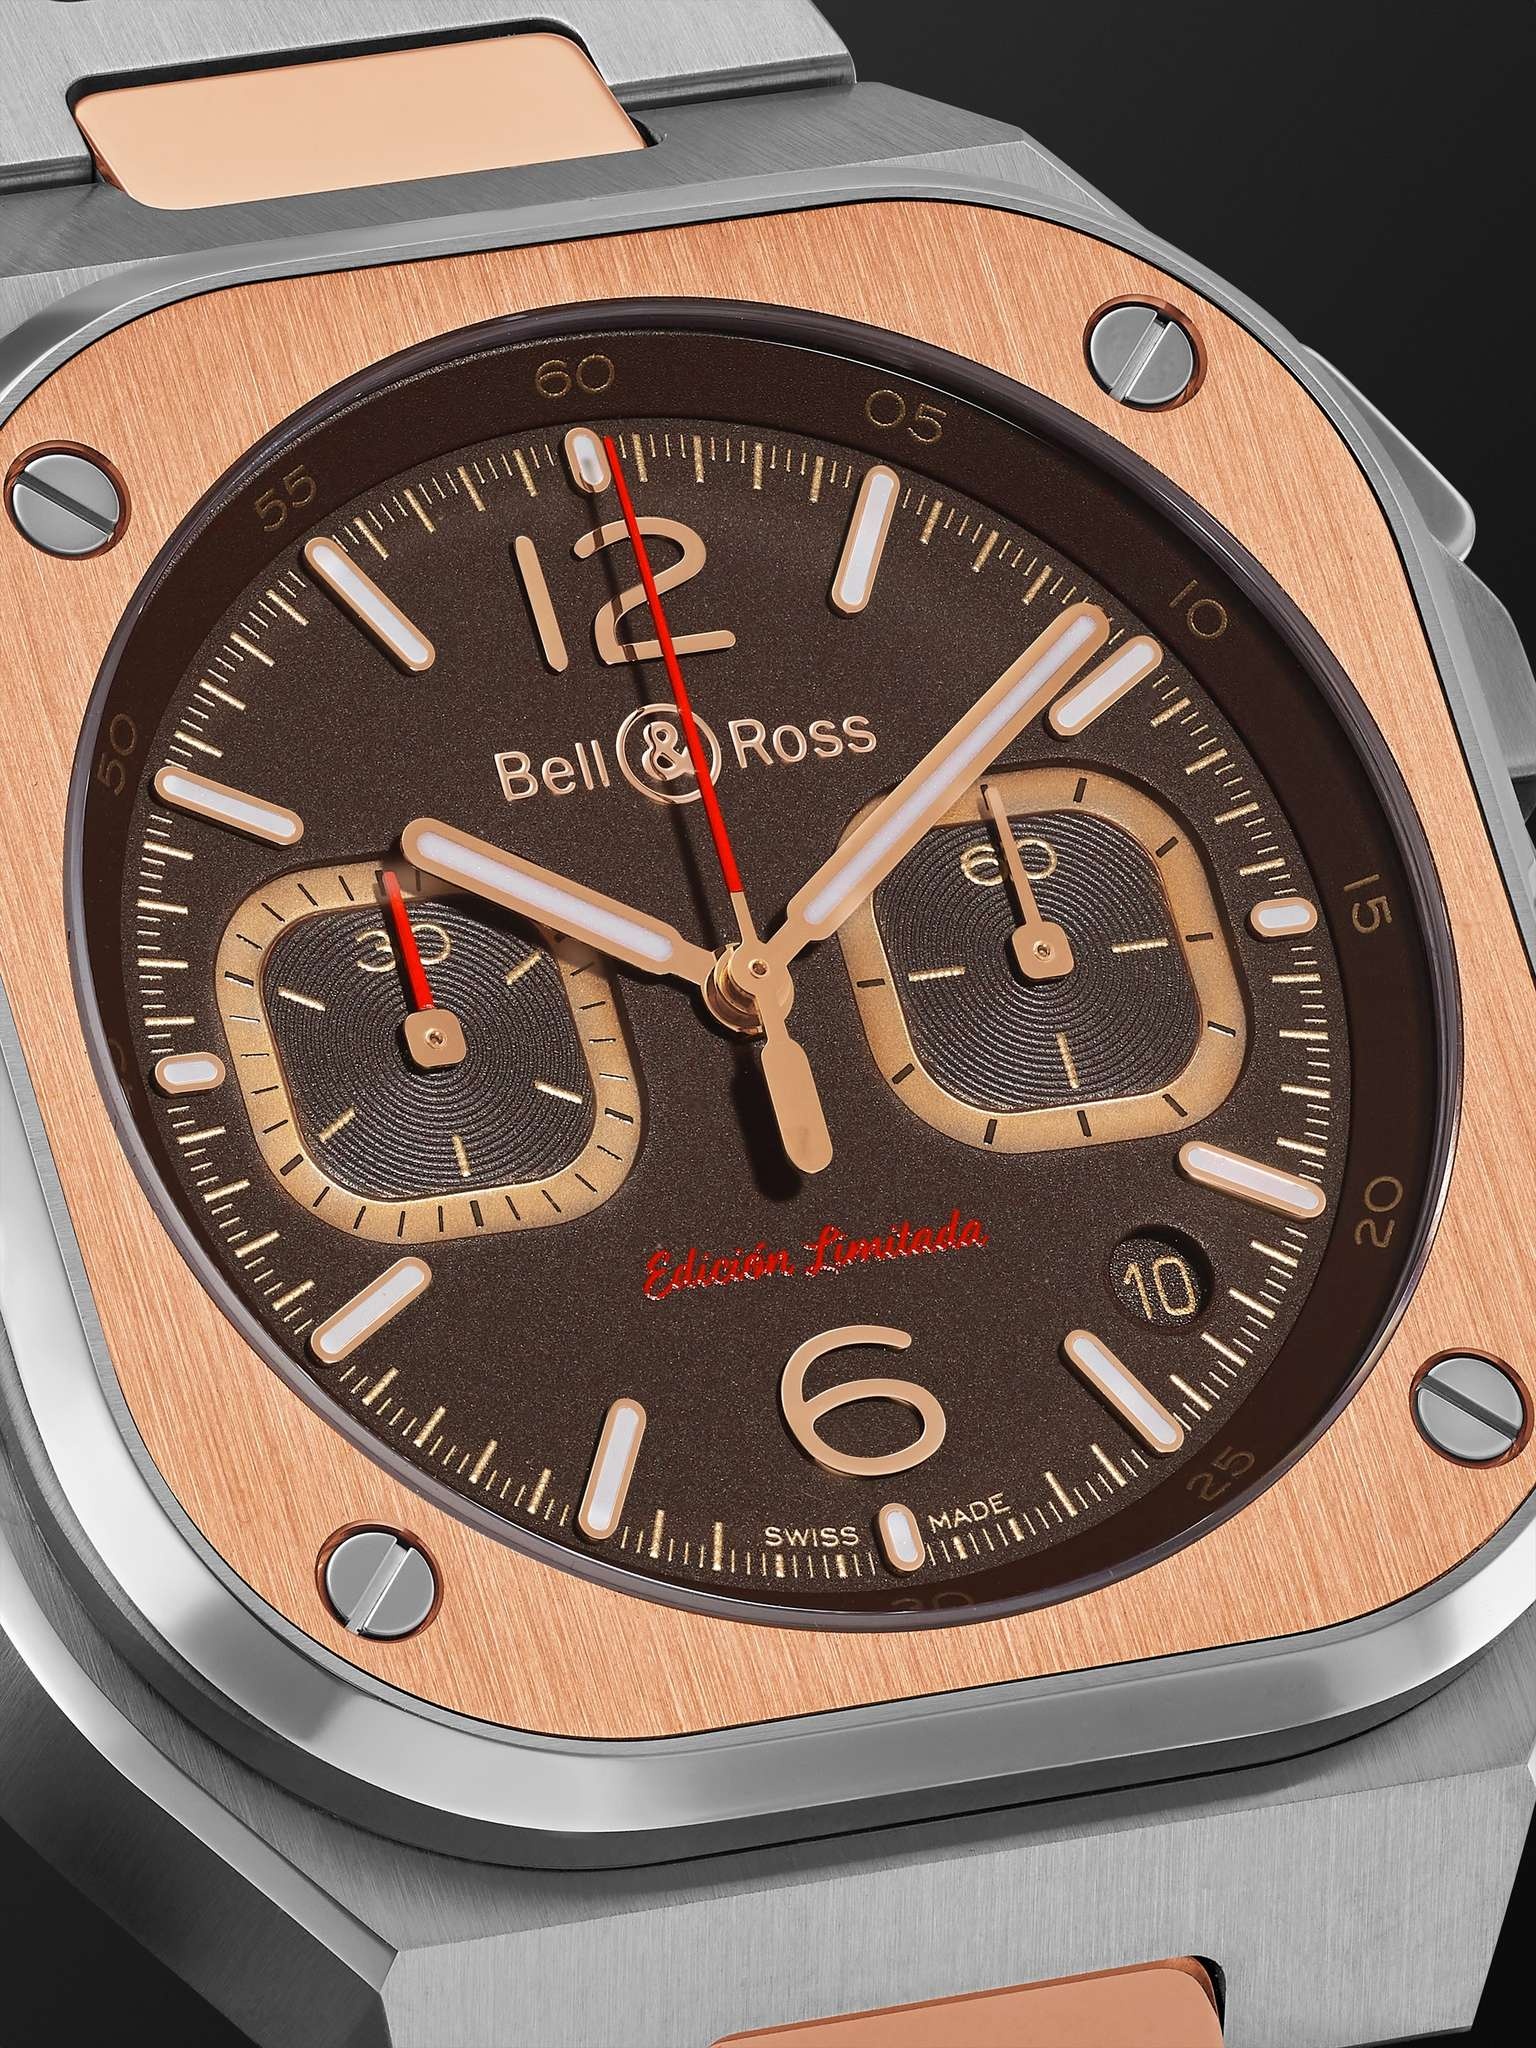 BR 05 Limited Edition Automatic Chronograph 42mm Stainless Steel and Rose Gold Watch, Ref. No. BR05C - 10